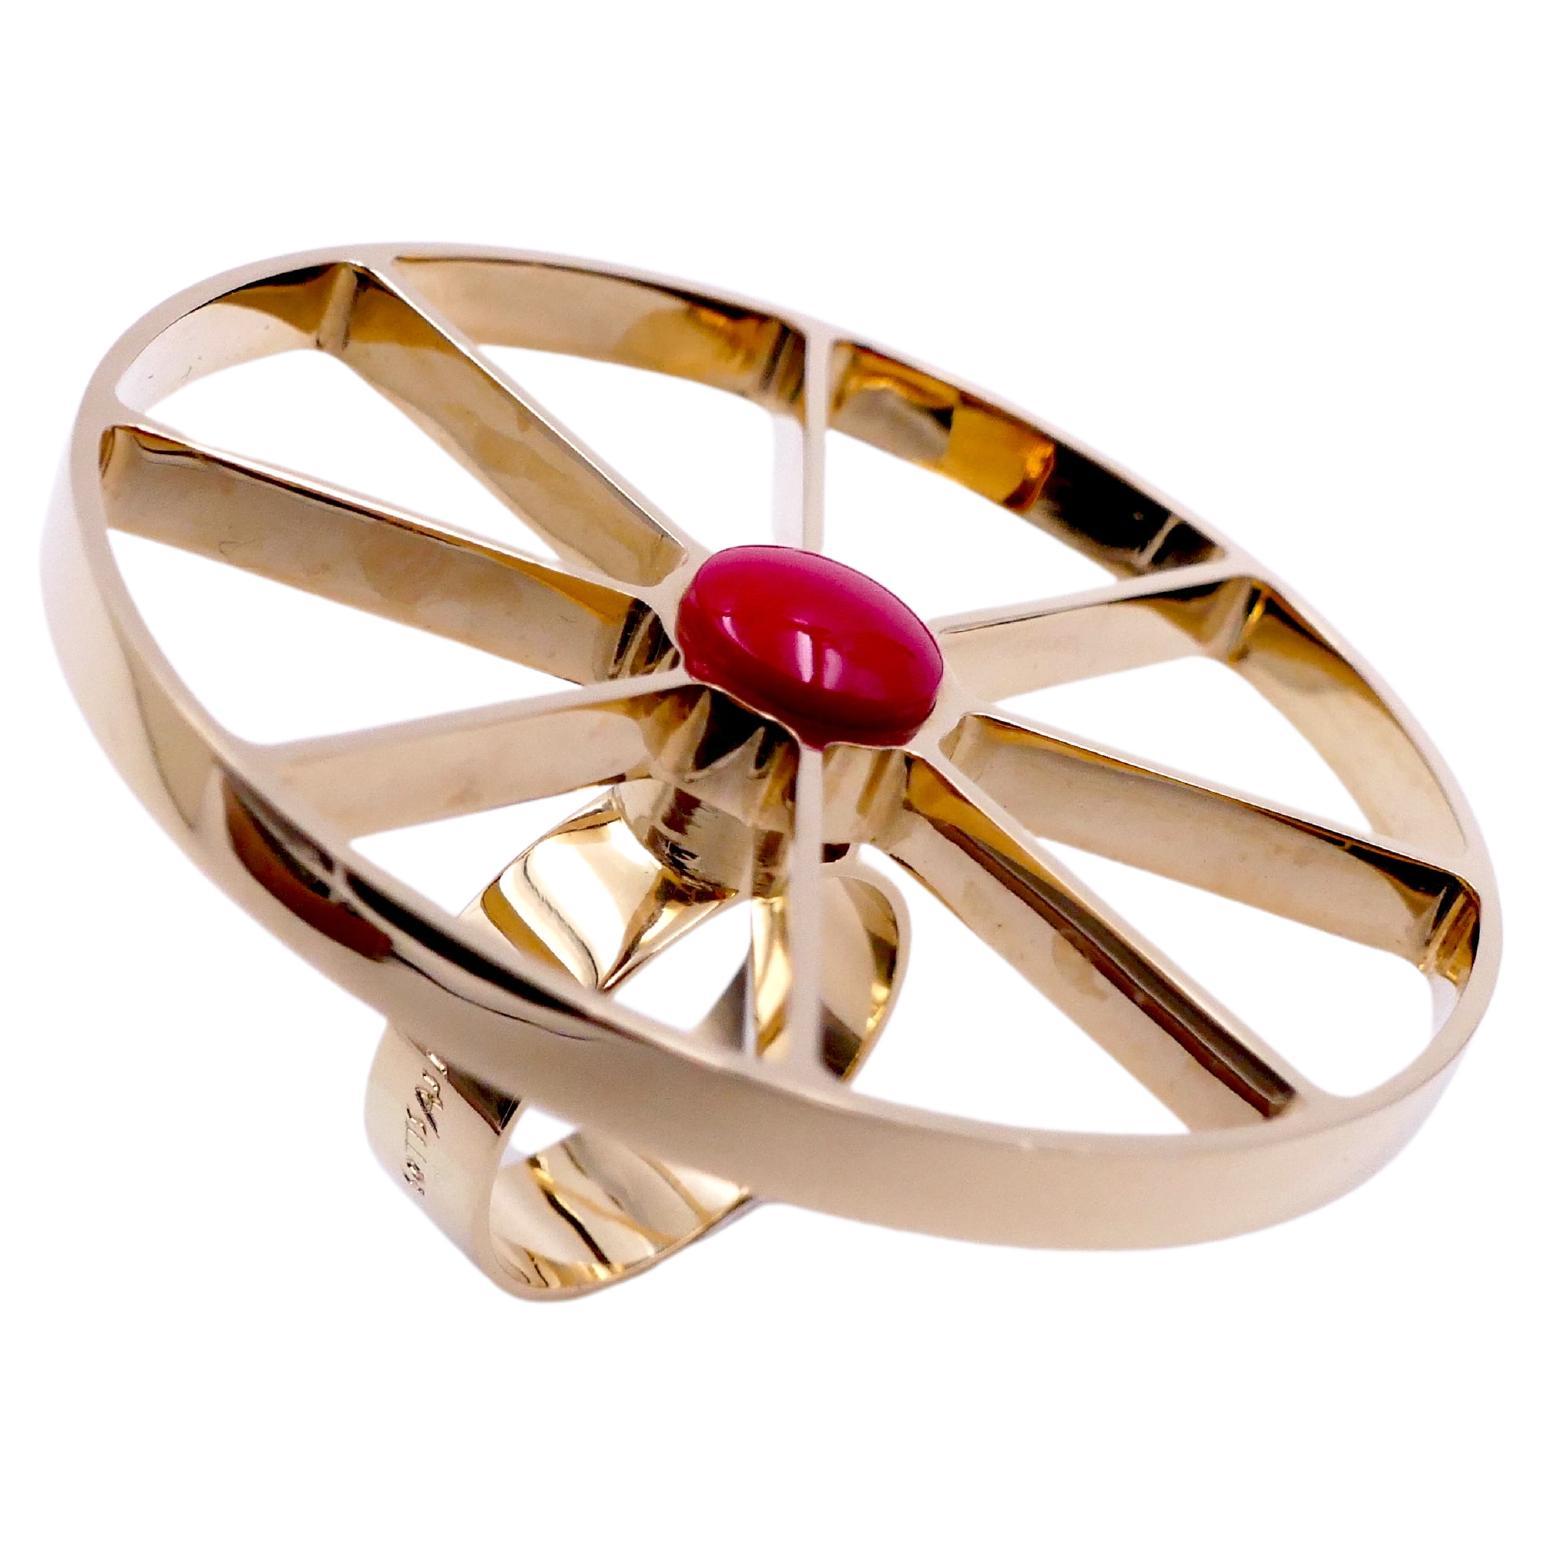 Ettore Sottsass "Ruota" 'Wheel' 18 Carat and Coral Ring, Limited Edition For Sale